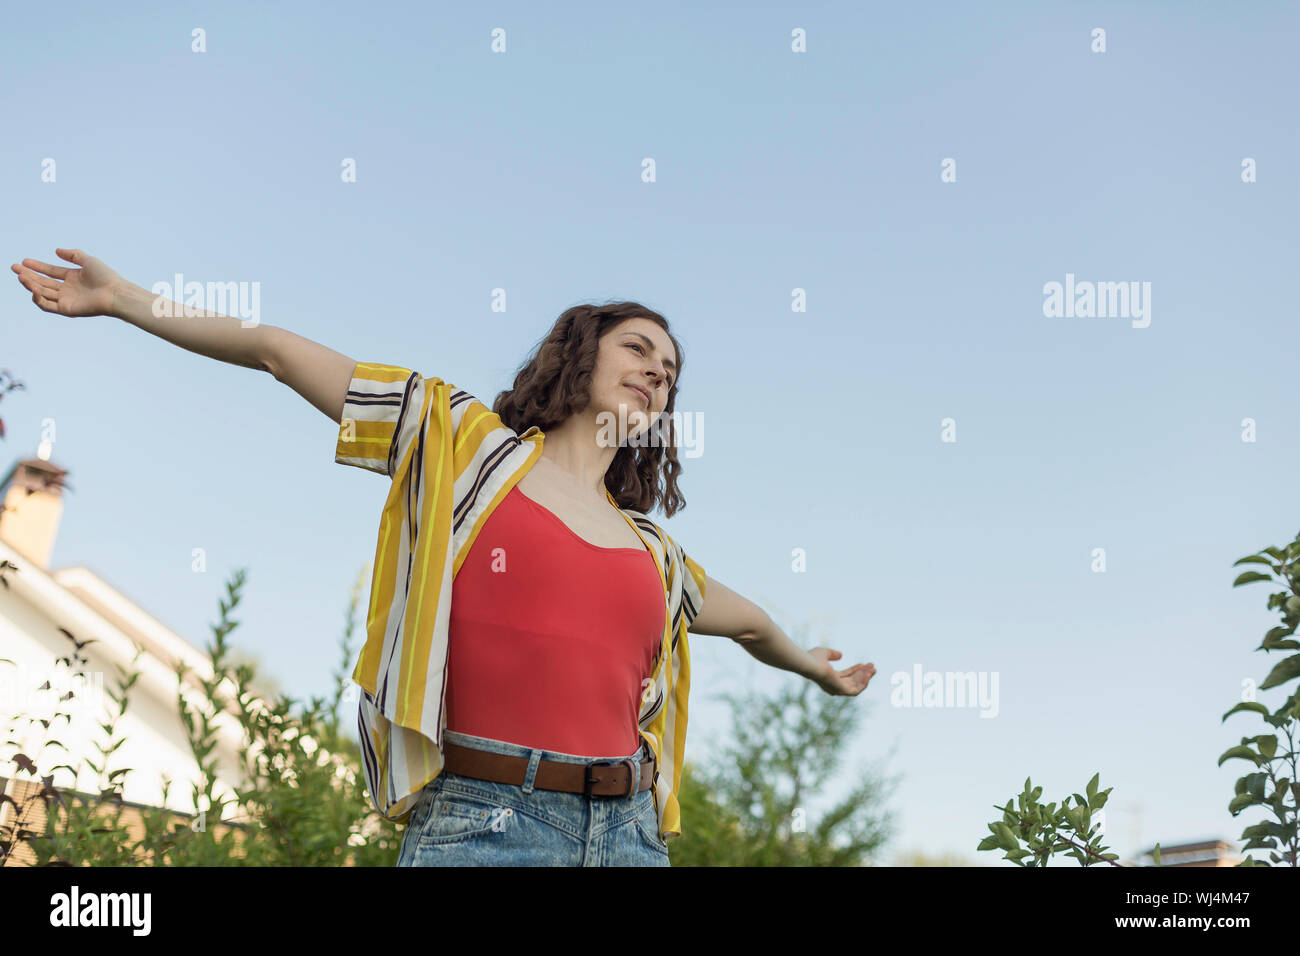 Carefree woman with arms outstretched in back yard Stock Photo